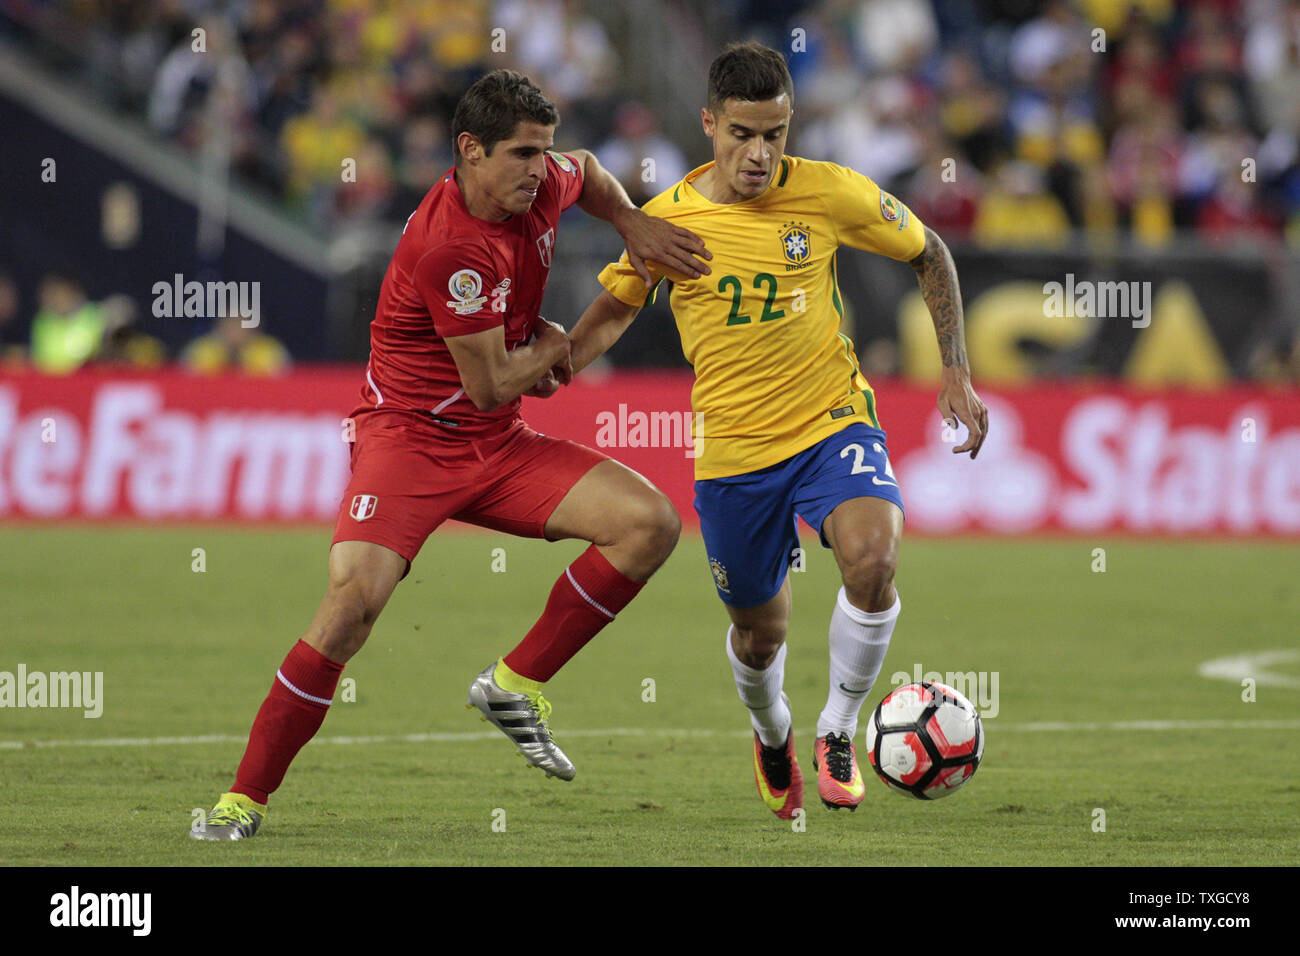 Peru defenseman Aldo Corzo (3) and Brazil midfielder Philippe Coutinho (22) tangle with each other in the first half of the 2016 Copa America Centenario Group B match at Gillette Stadium in Foxborough, Massachusetts on June 12, 2016.  Photo by Matthew Healey/UPI Stock Photo